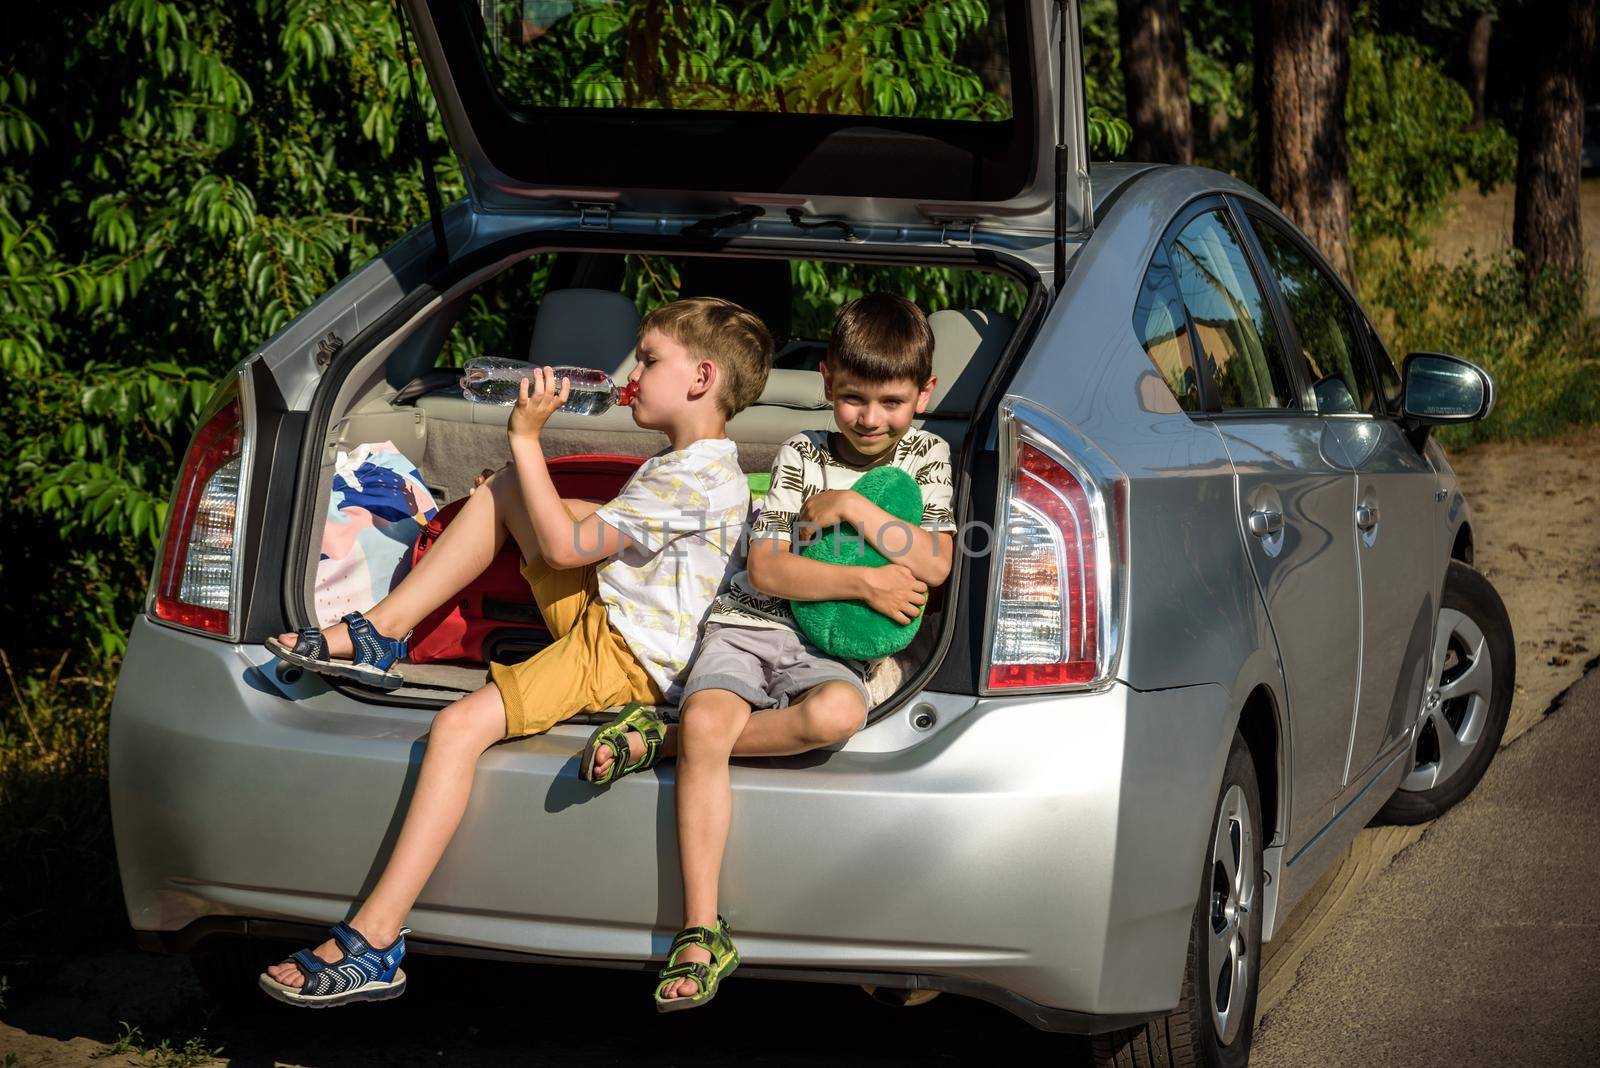 Two happy children boy and his brother sitting together in a car trunk. Cheerful kids hugging each other in family vehicle luggage compartment. Weekend travel and holidays concept by Kobysh